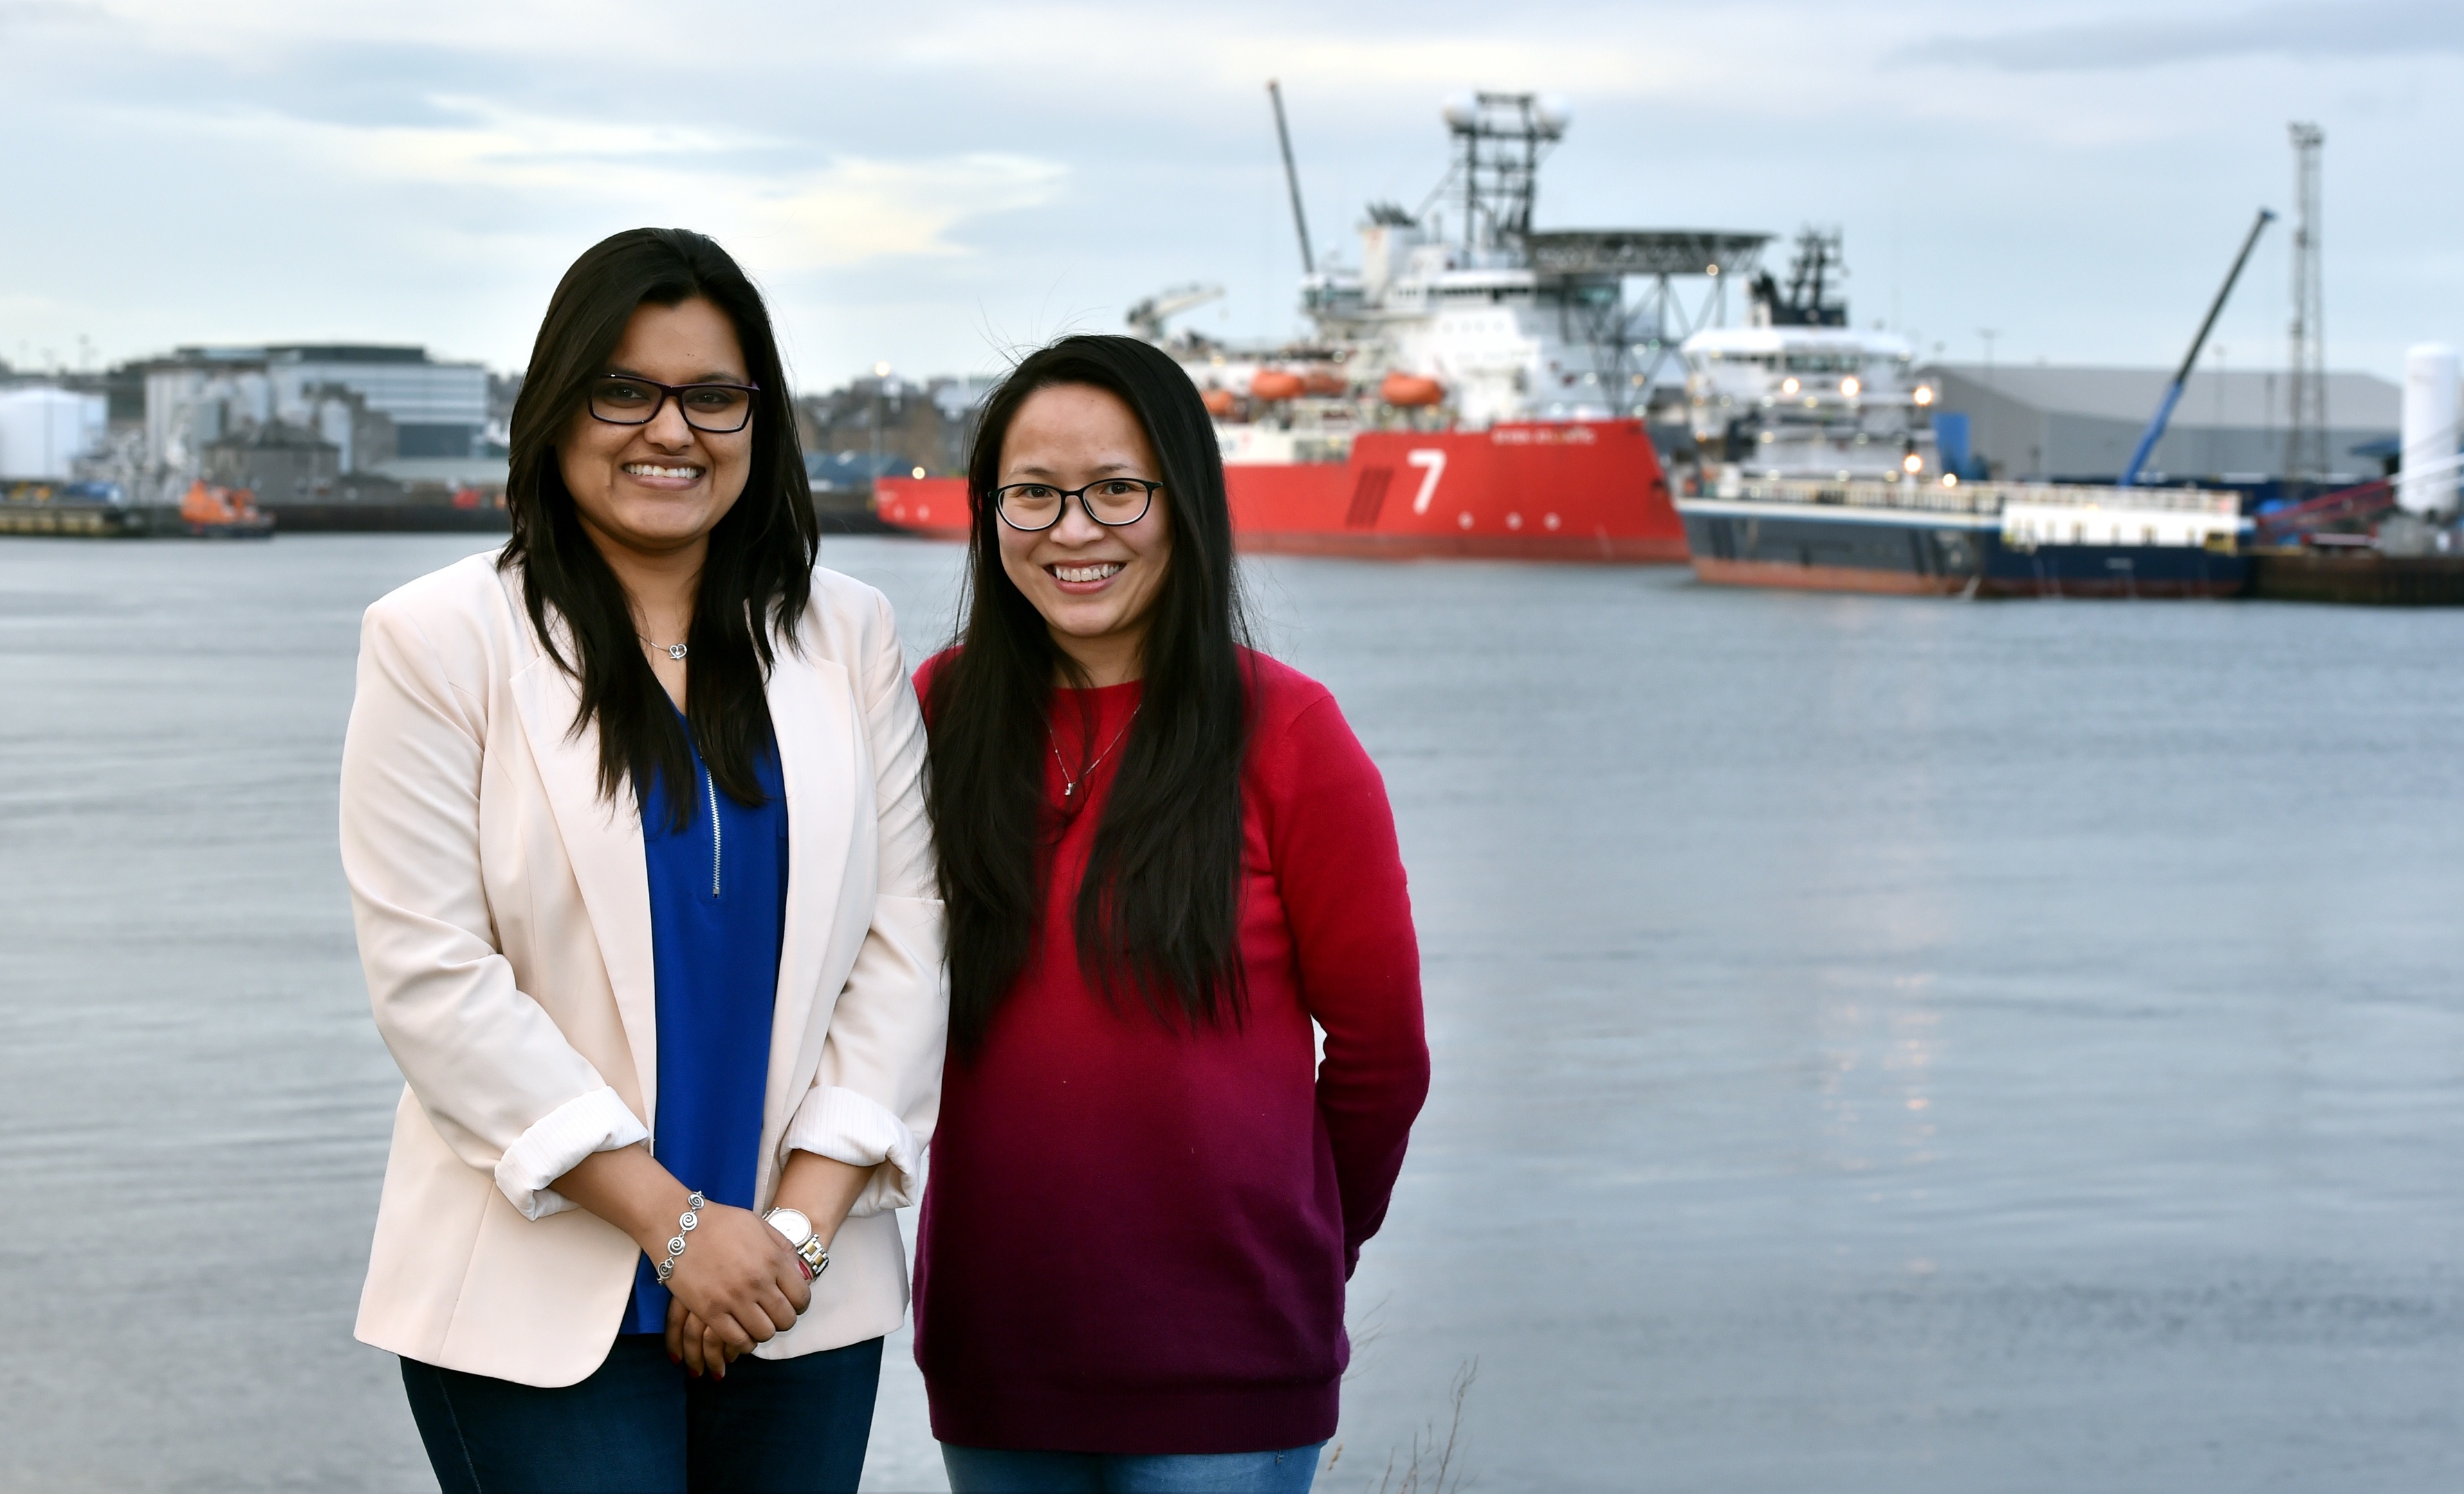 Ritika Pawar (left) and Lien Ta with Aberdeen Harbour in the background.
Picture by COLIN RENNIE February 16, 2018.